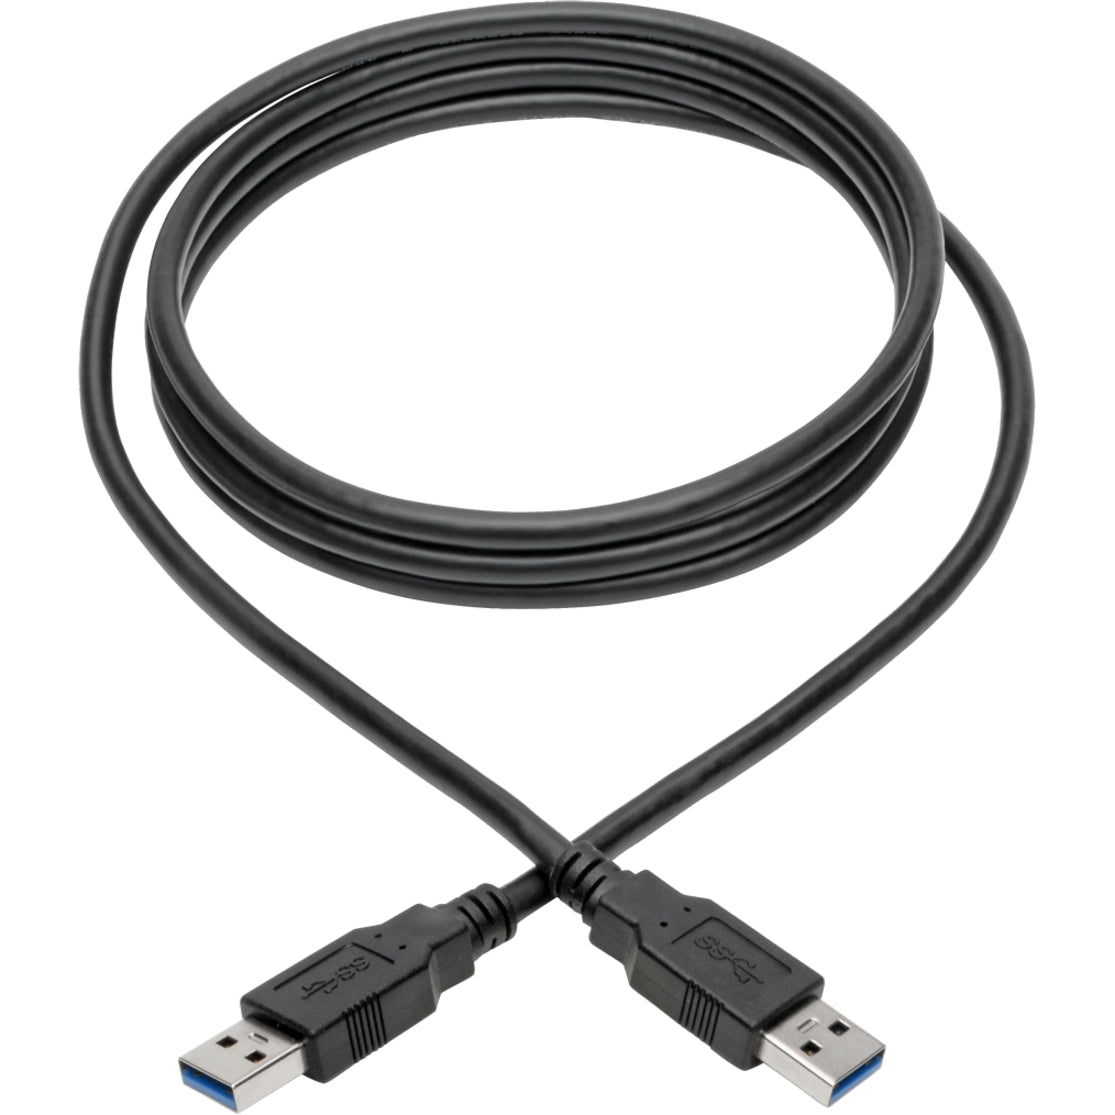 Tripp Lite U325-006 USB 3.0 SuperSpeed A/A Cable, Black, 6 ft., Corrosion Resistant, Flexible, EMI/RF Protection